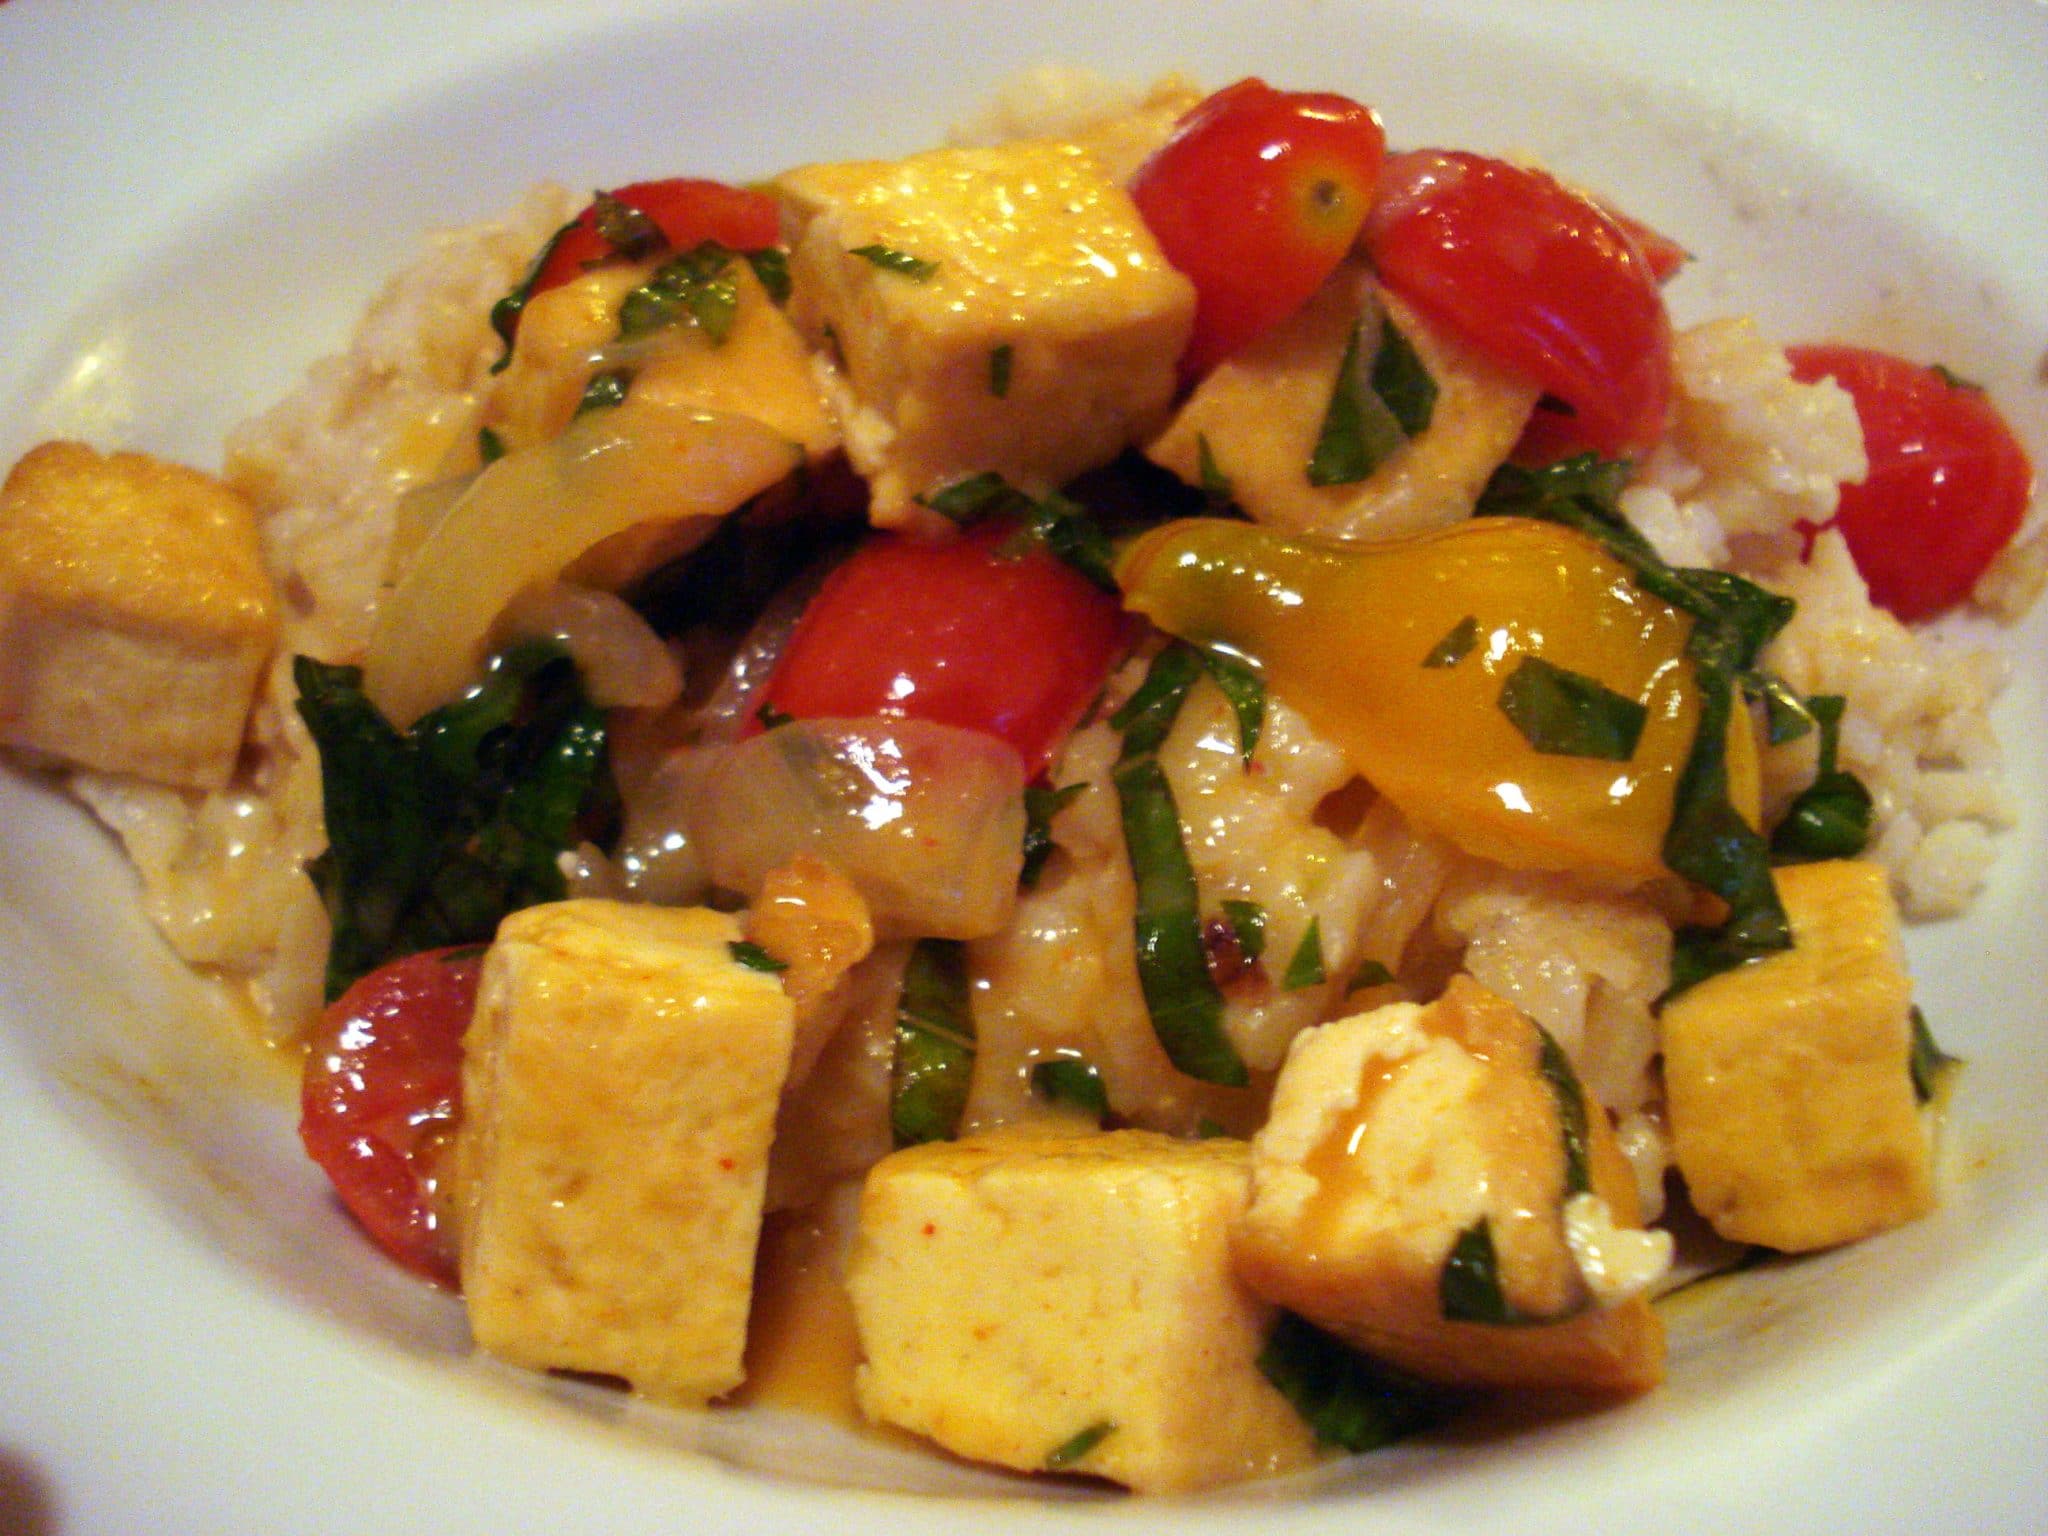 Plate of Tofu Curry with onions and tomatoes